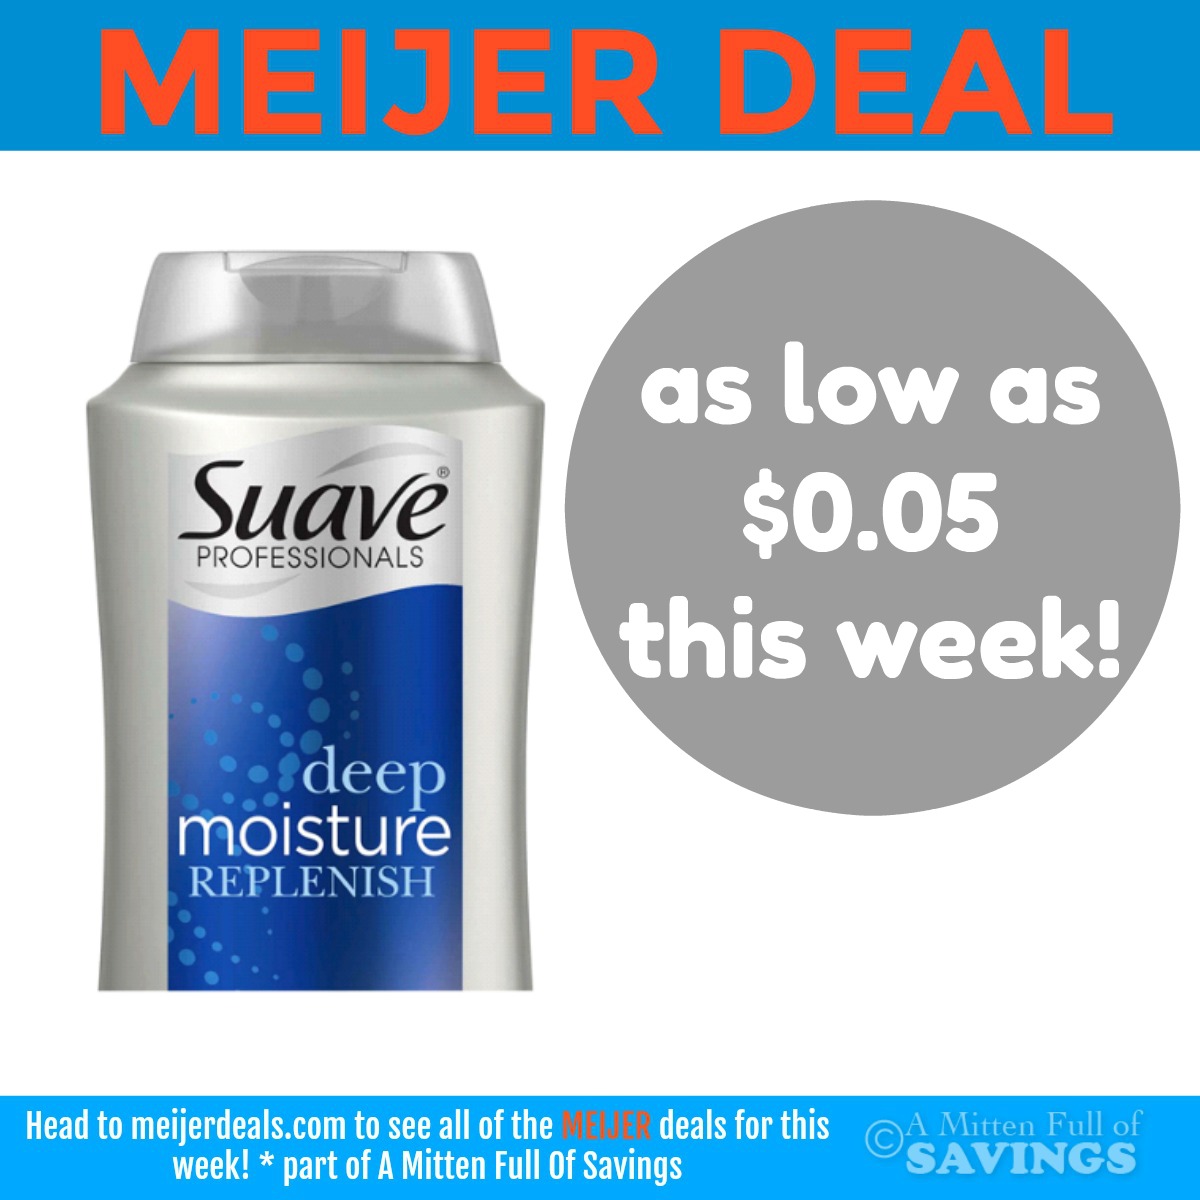 Meijer: Suave Professionals hair care as low as $0.05 this week! #stockup